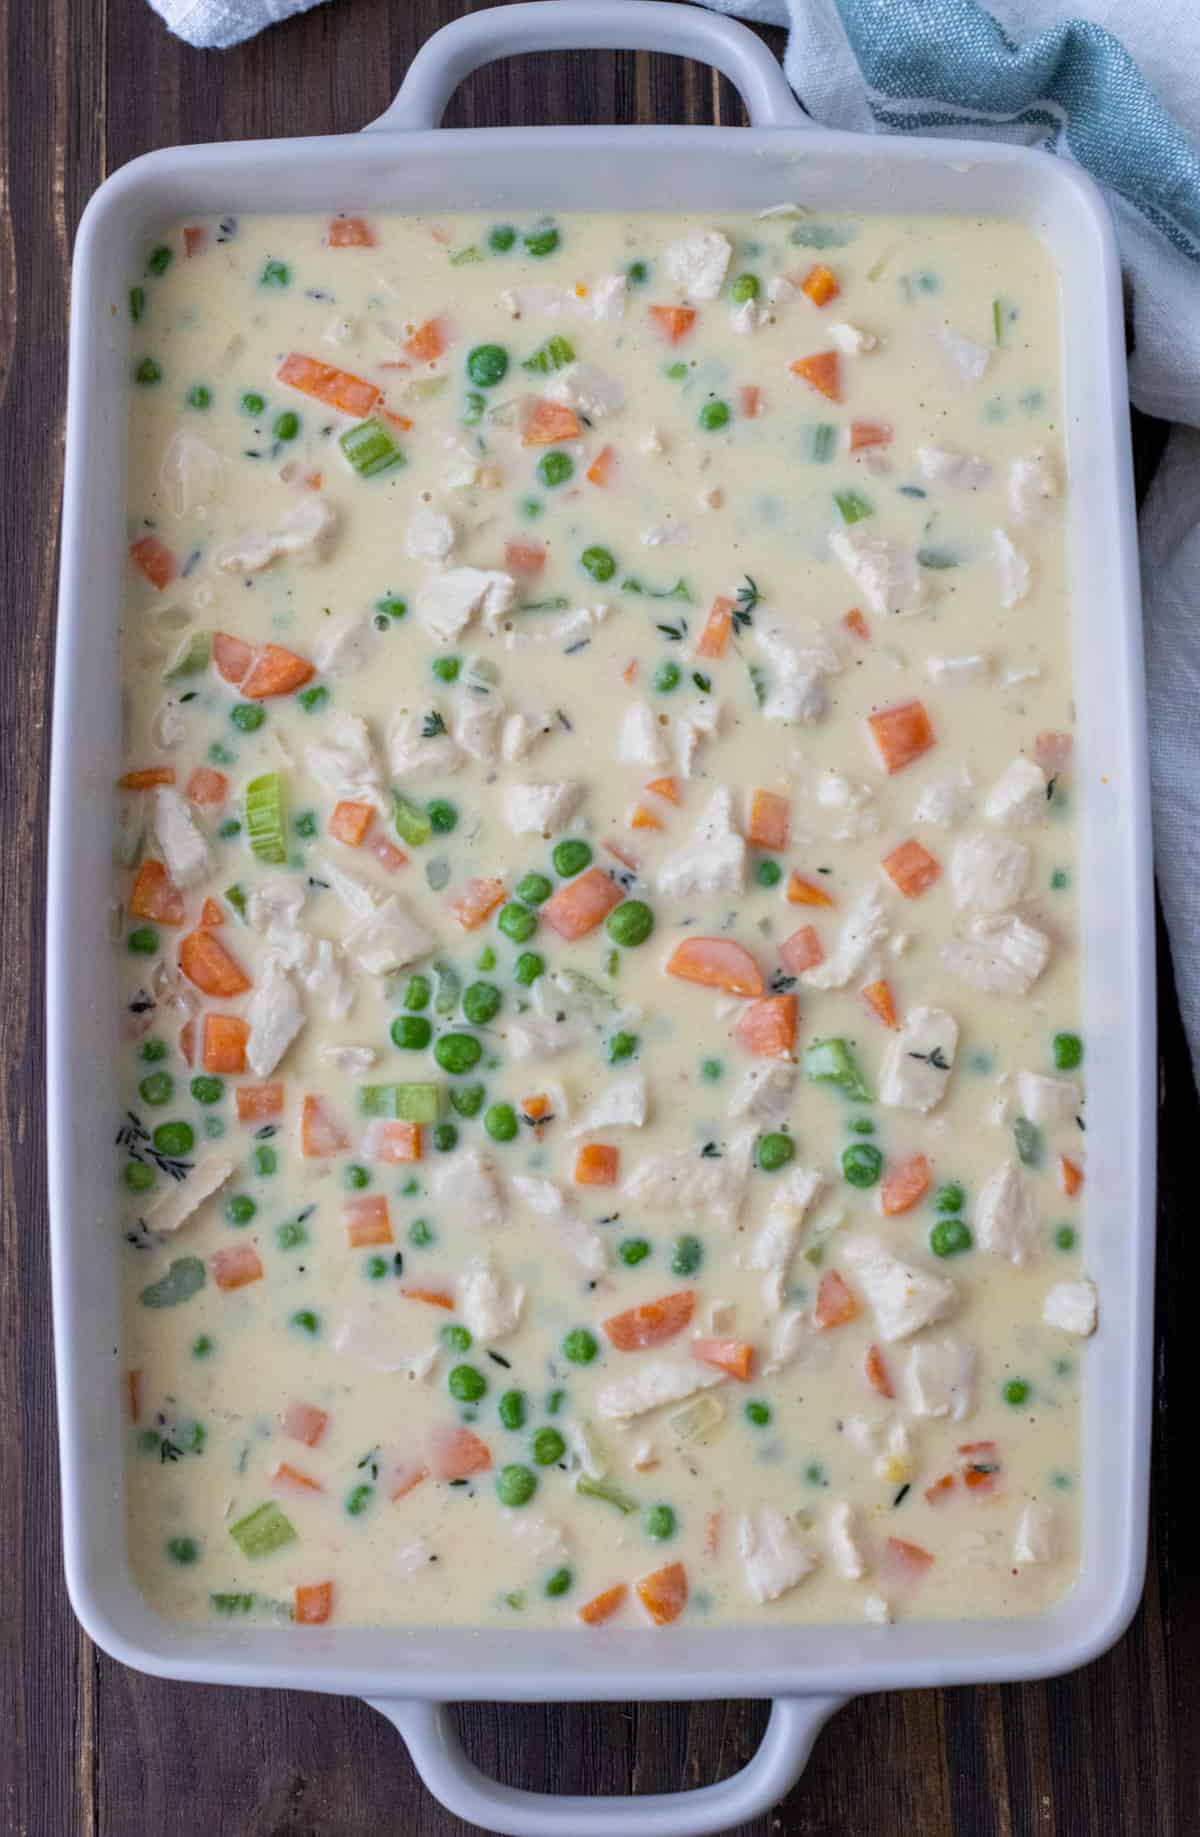 Chicken pot pie filling in a 9x13 baking dish without the puff pastry topping.